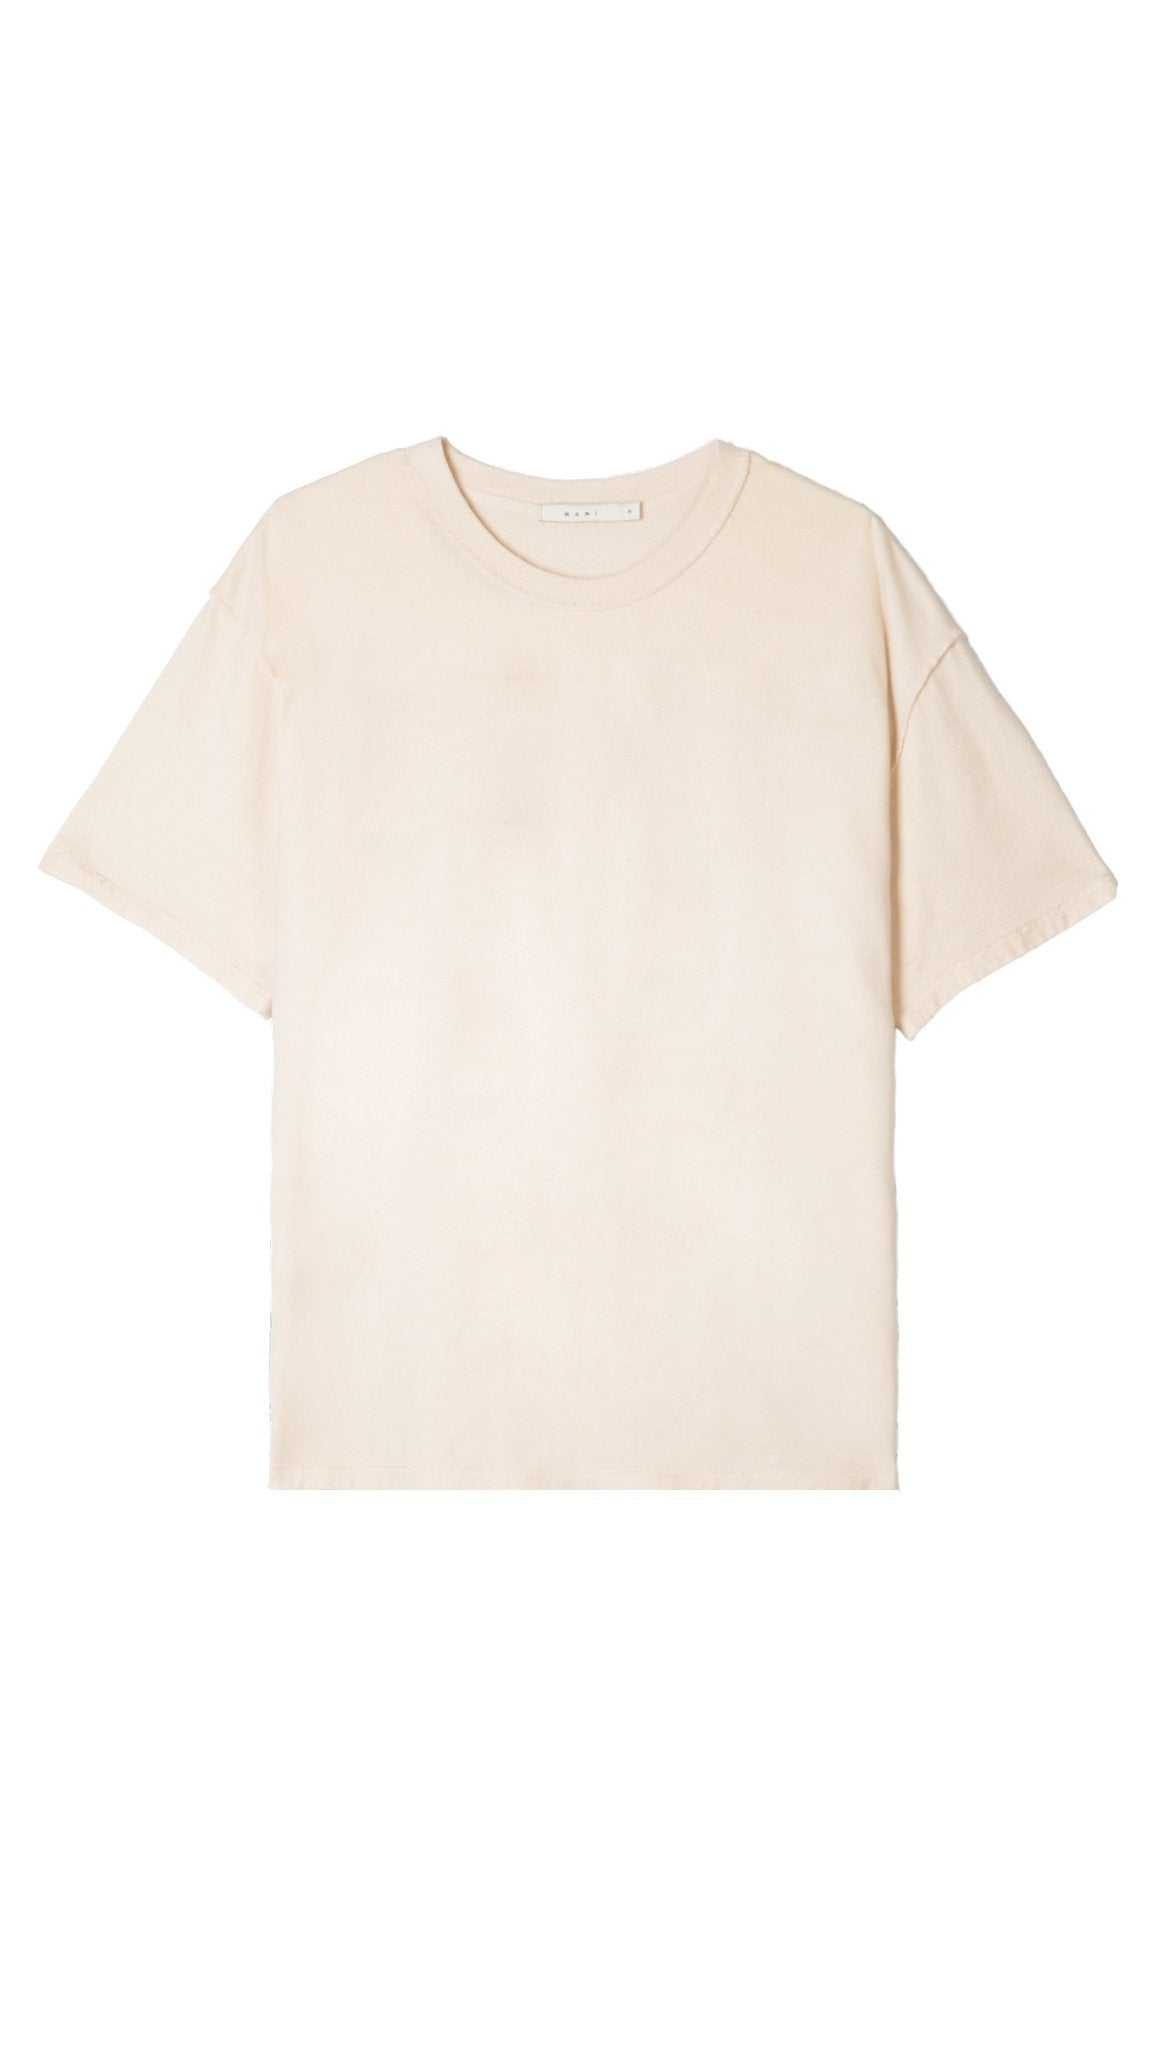 Inside Out Tee - White, mnml